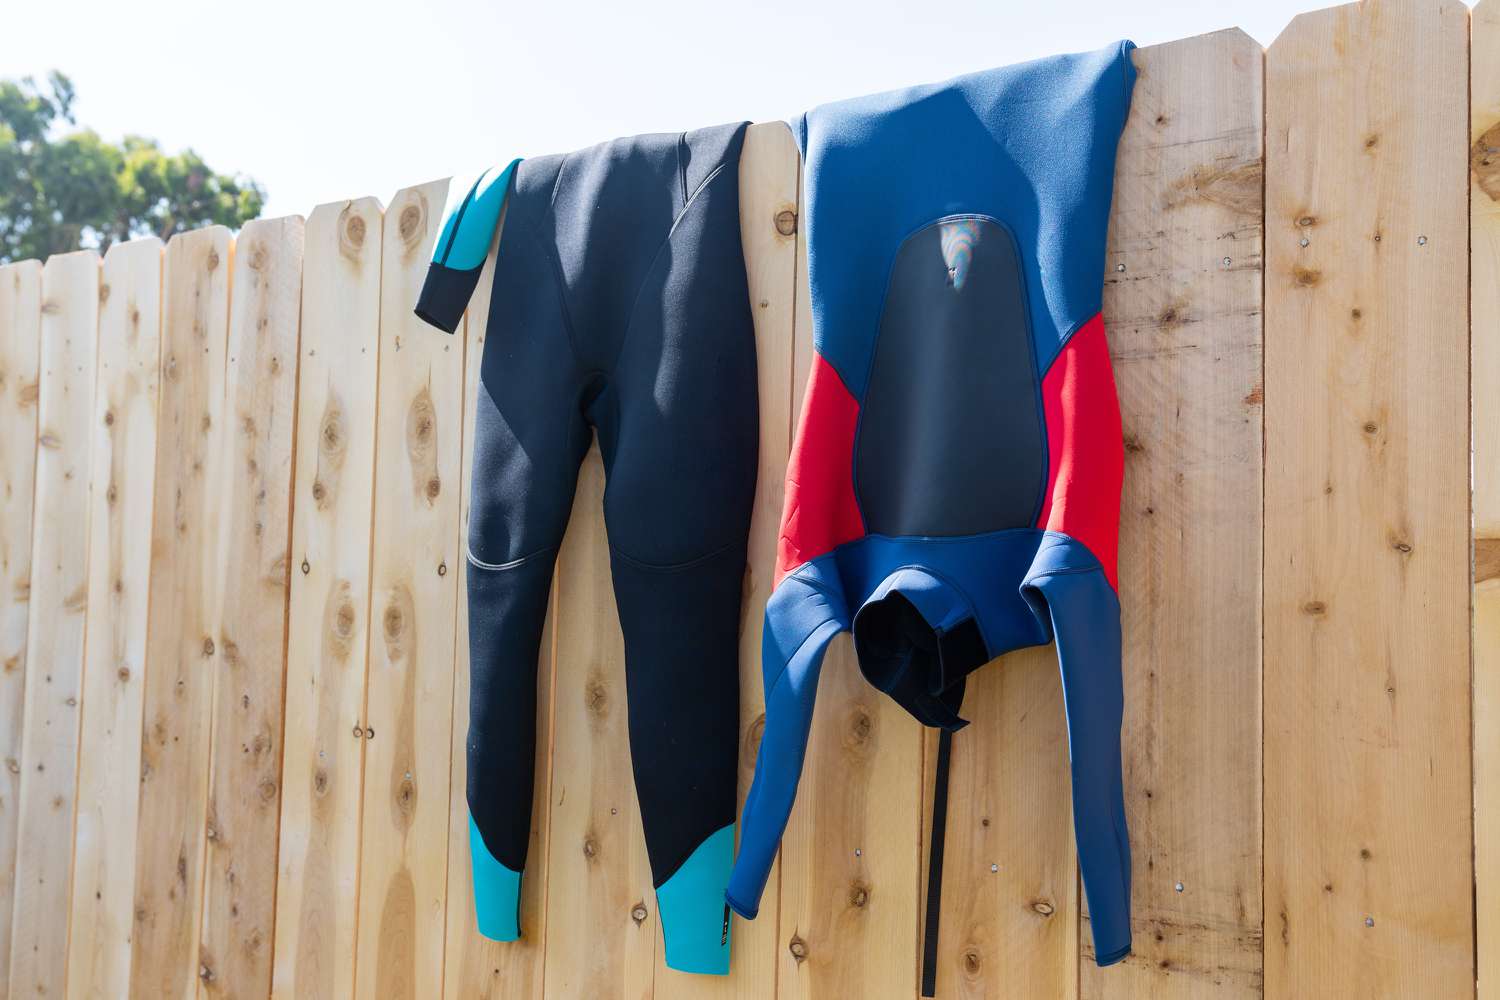 Blue and black wetsuit hanging over wooden fence to air dry